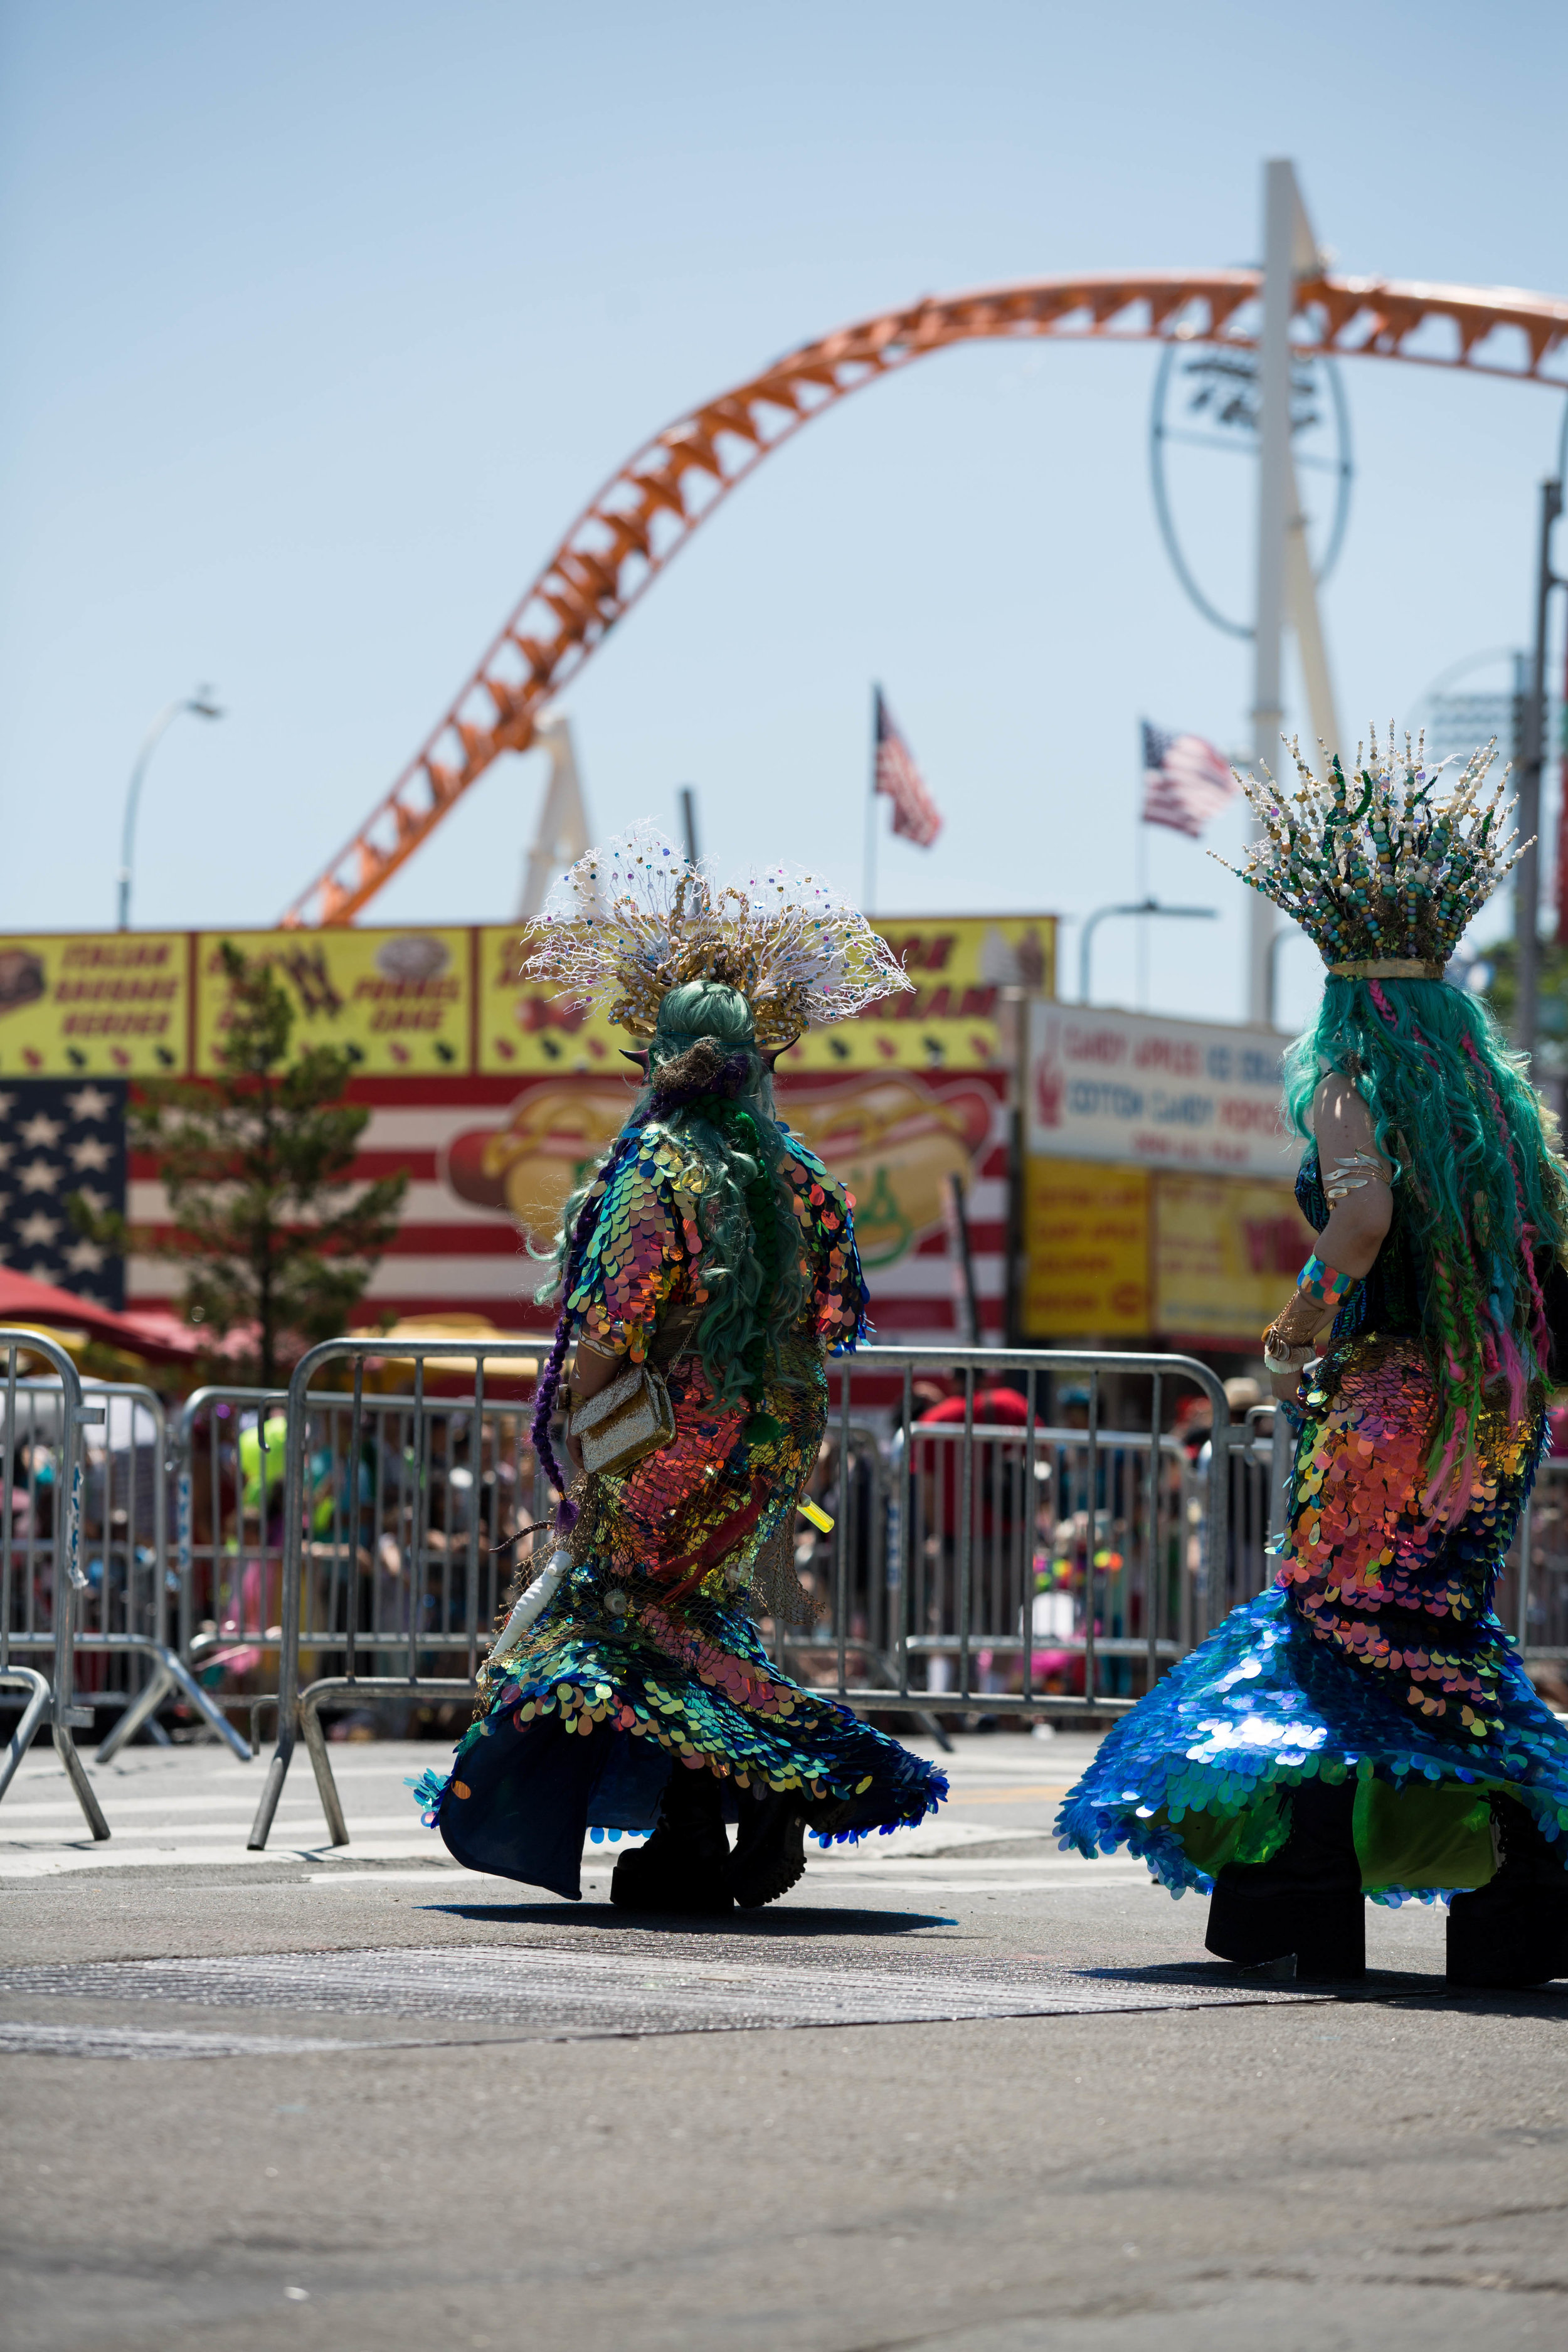  Sea creatures march down Surf Ave at Coney Island's 36th anual Mermaid Day Parade, on Saturday June 16, in New York. Photo: Wes Parnell 